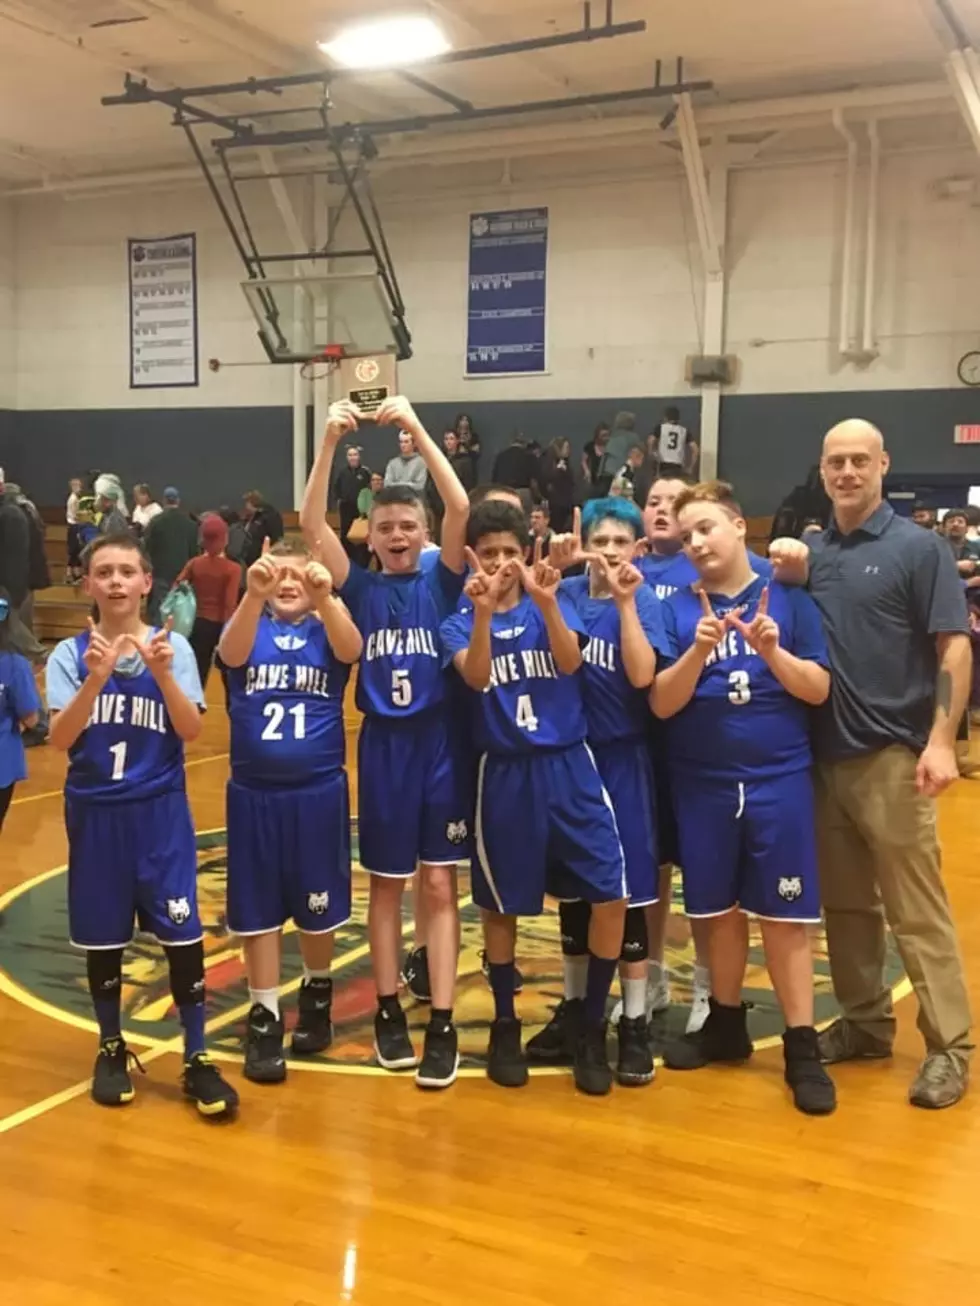 Cave Hill Boys Basketball Team Win 1st Championship in School History